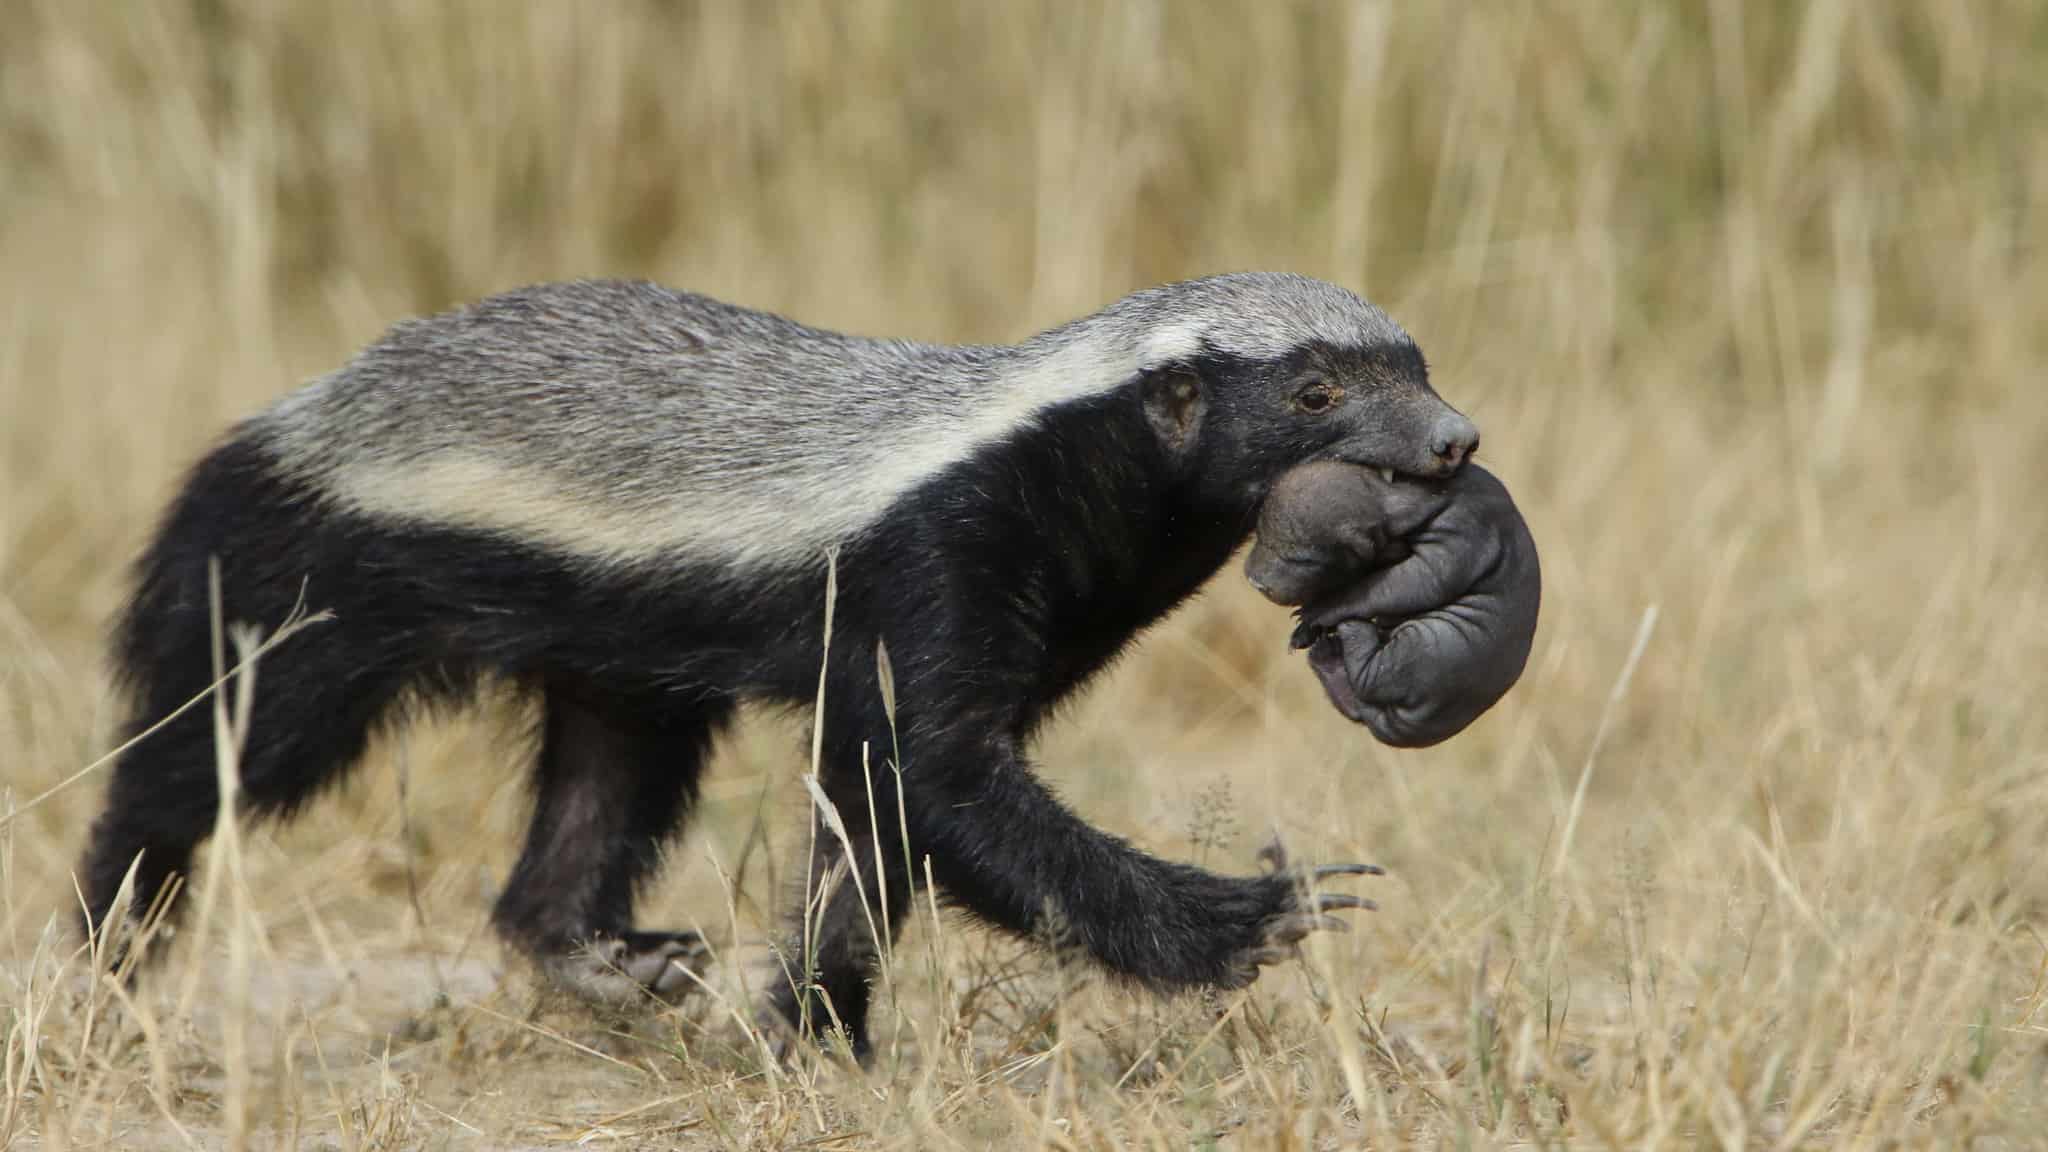 Definition & Meaning of Honey badger